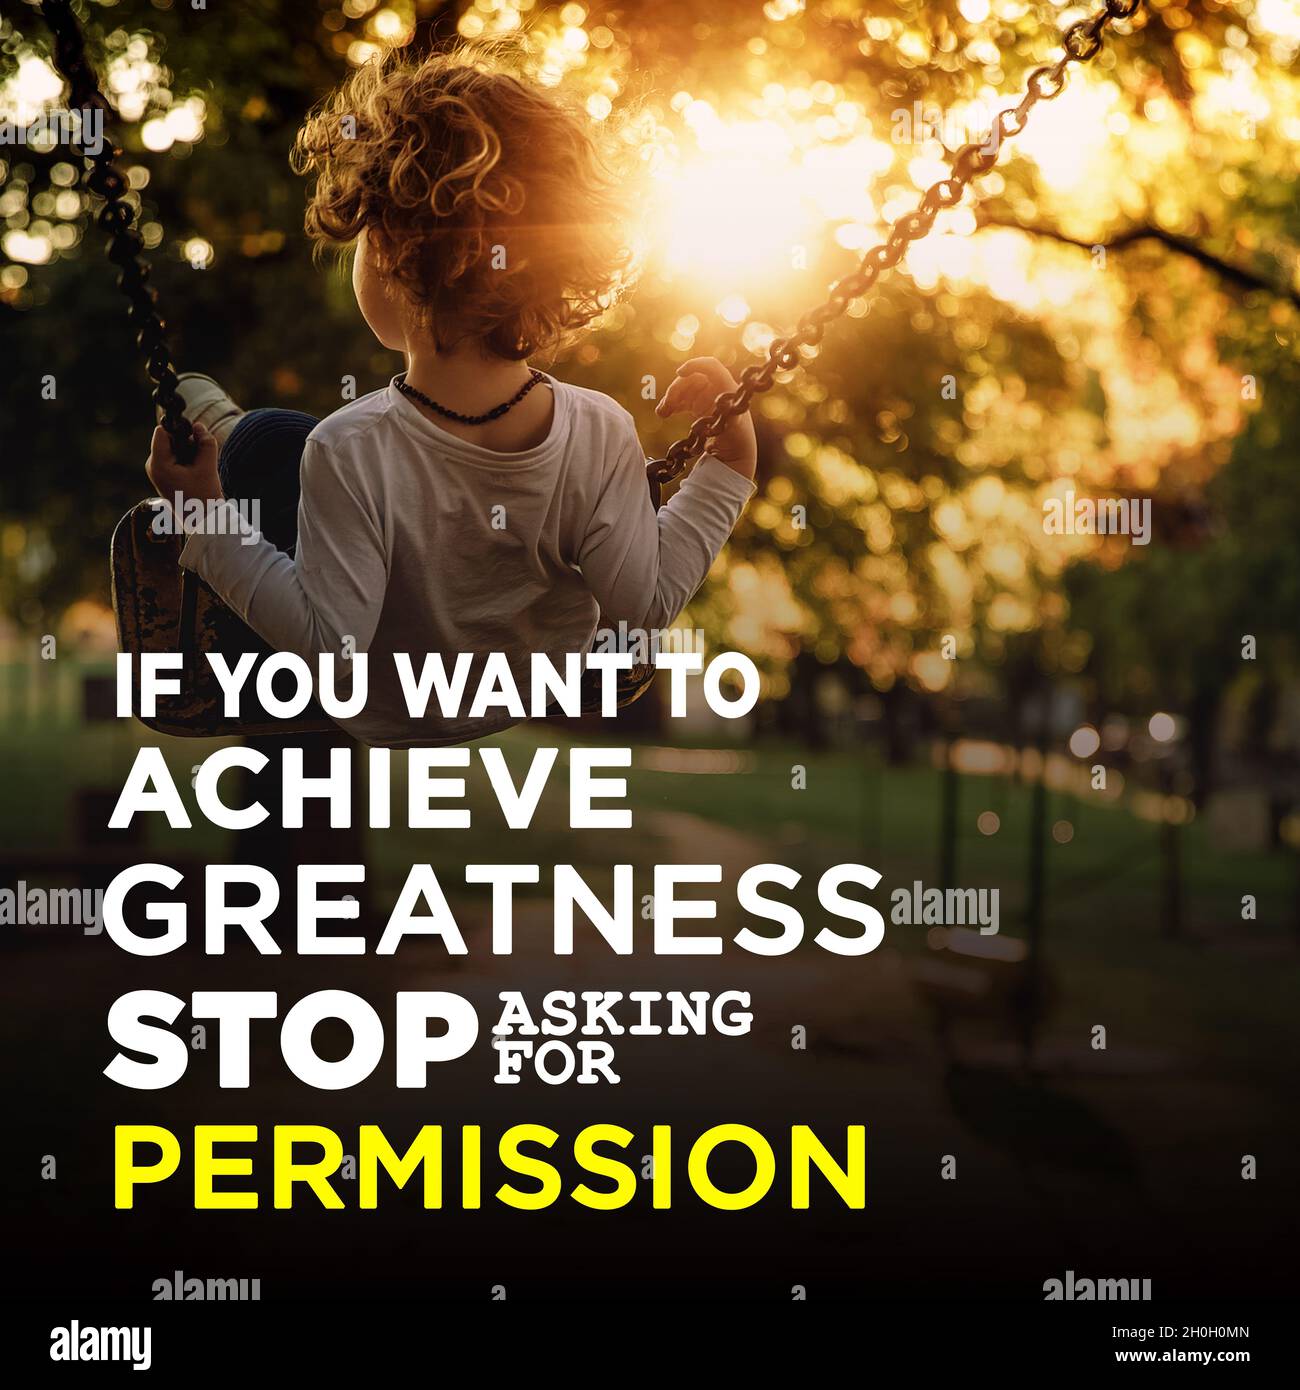 Inspirational quotes - if you want to achieve greatness stop asking for permission. Stock Photo